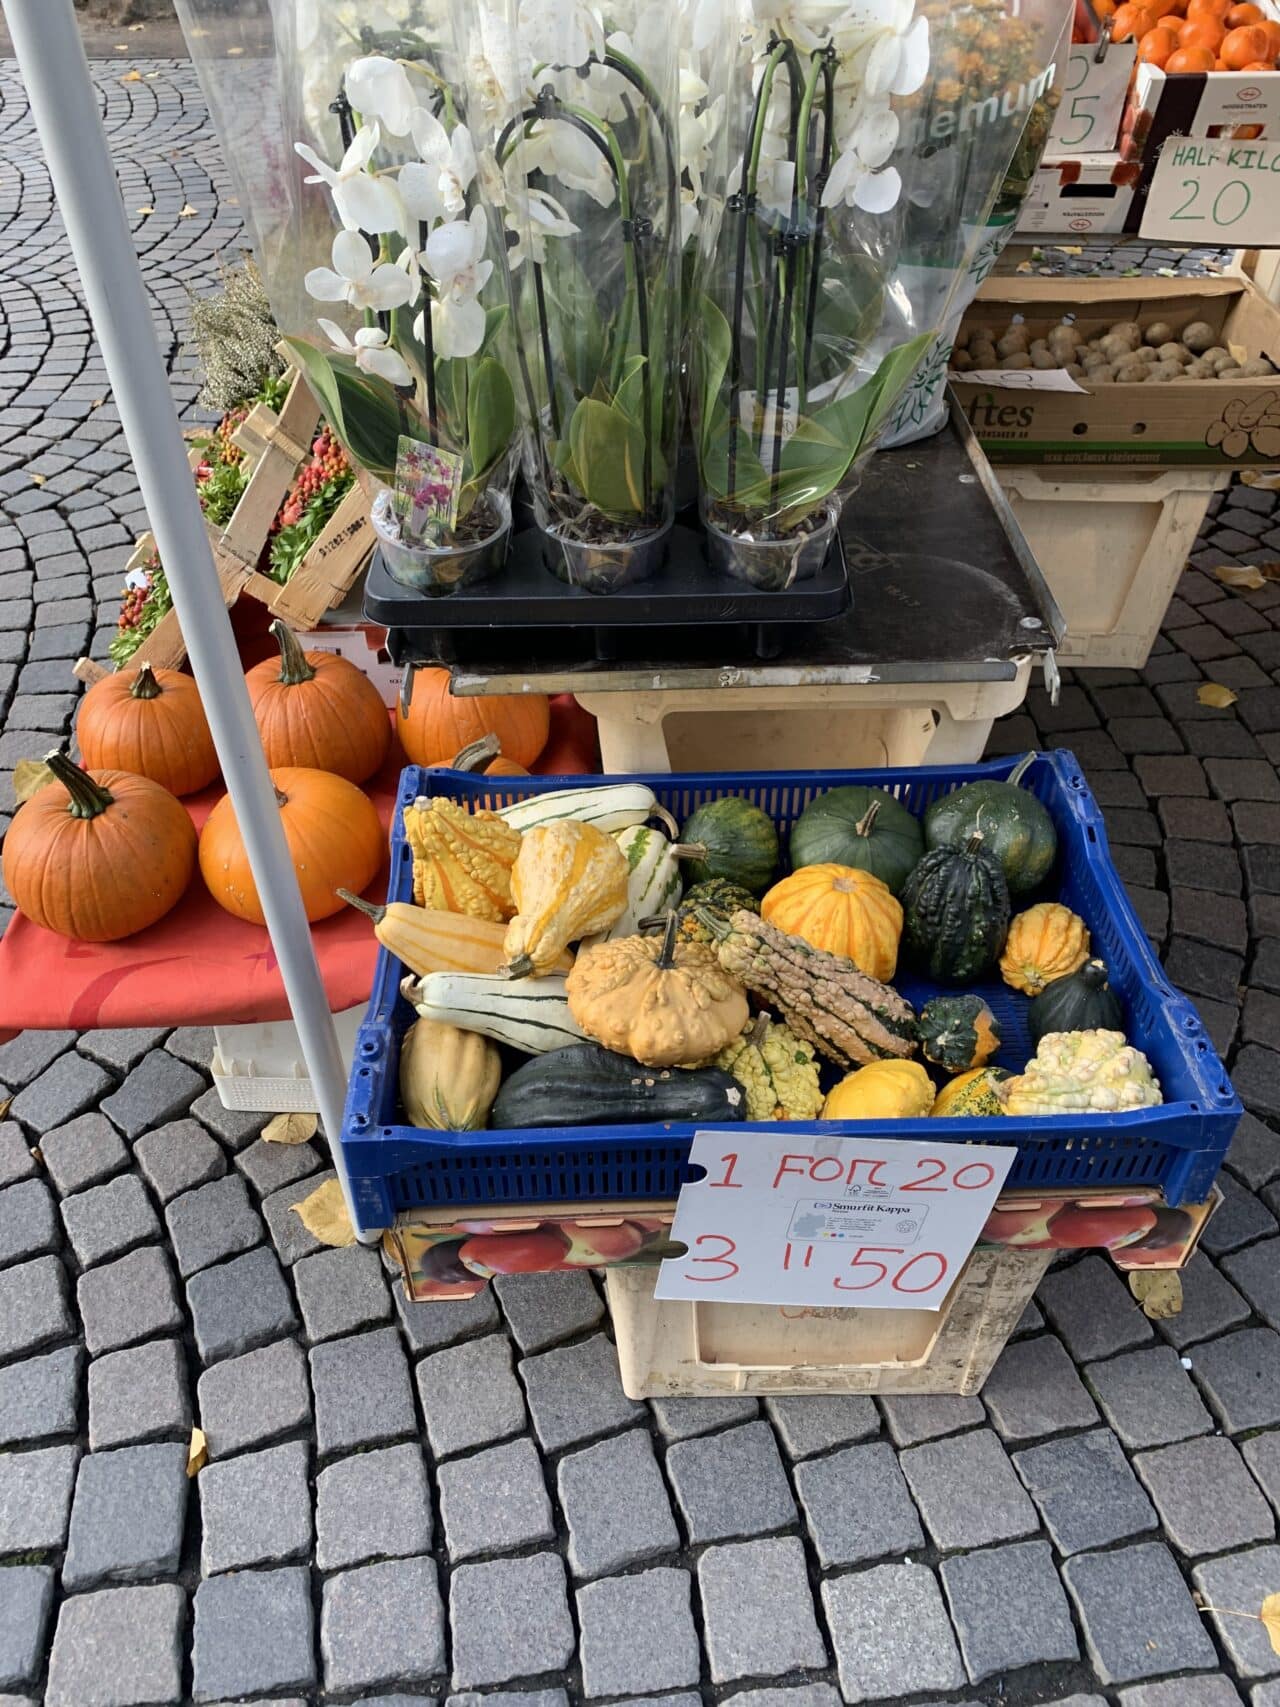 Pumpkins And Flowers For Sale In A City Square Market Stall